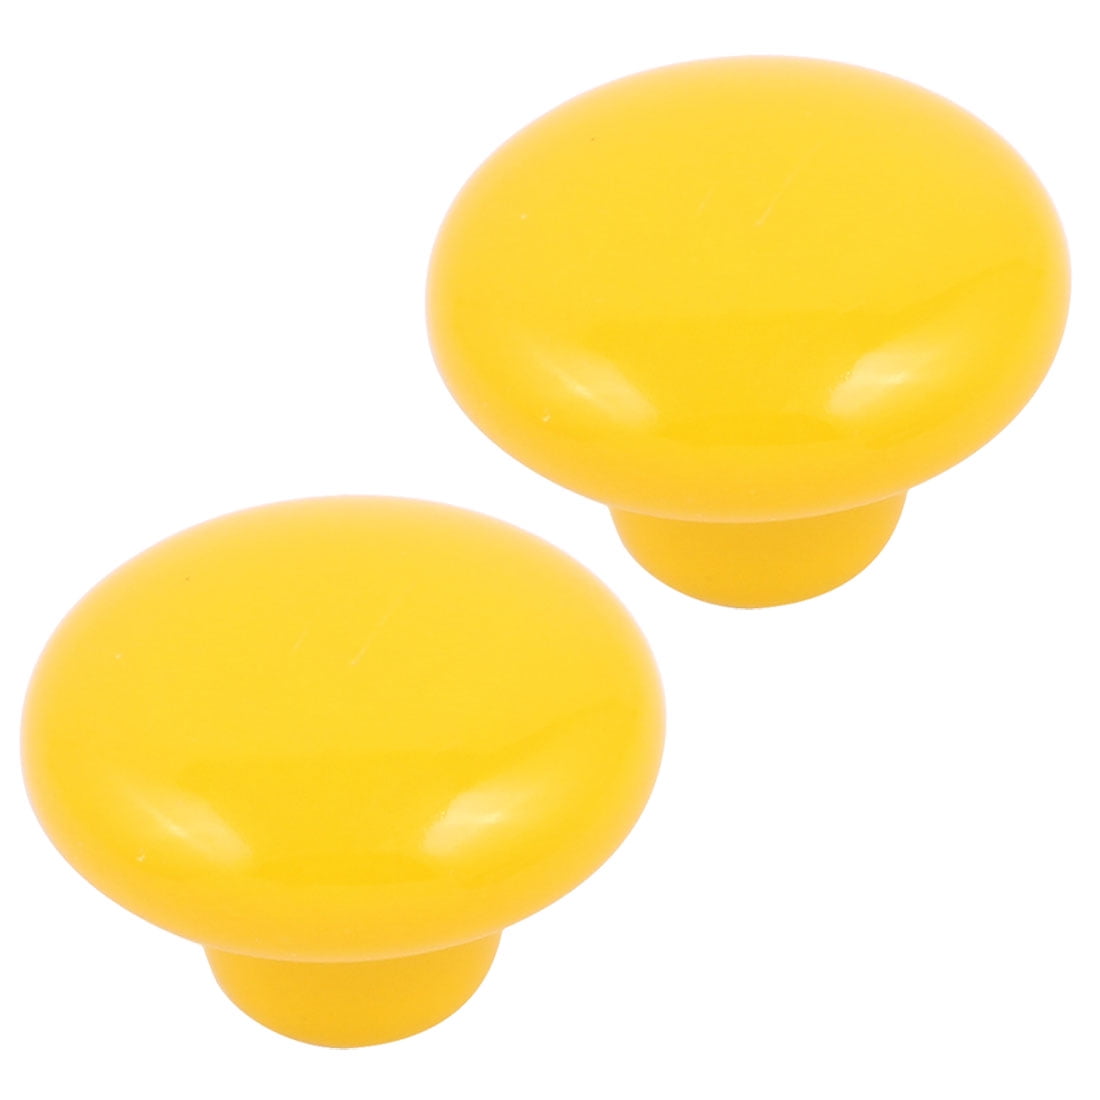 FirstDecor 6pcs Yellow Ceramic Knobs for Cabinet Round Style Cupboard Door Knobs Drawer Dresser Pull Handles